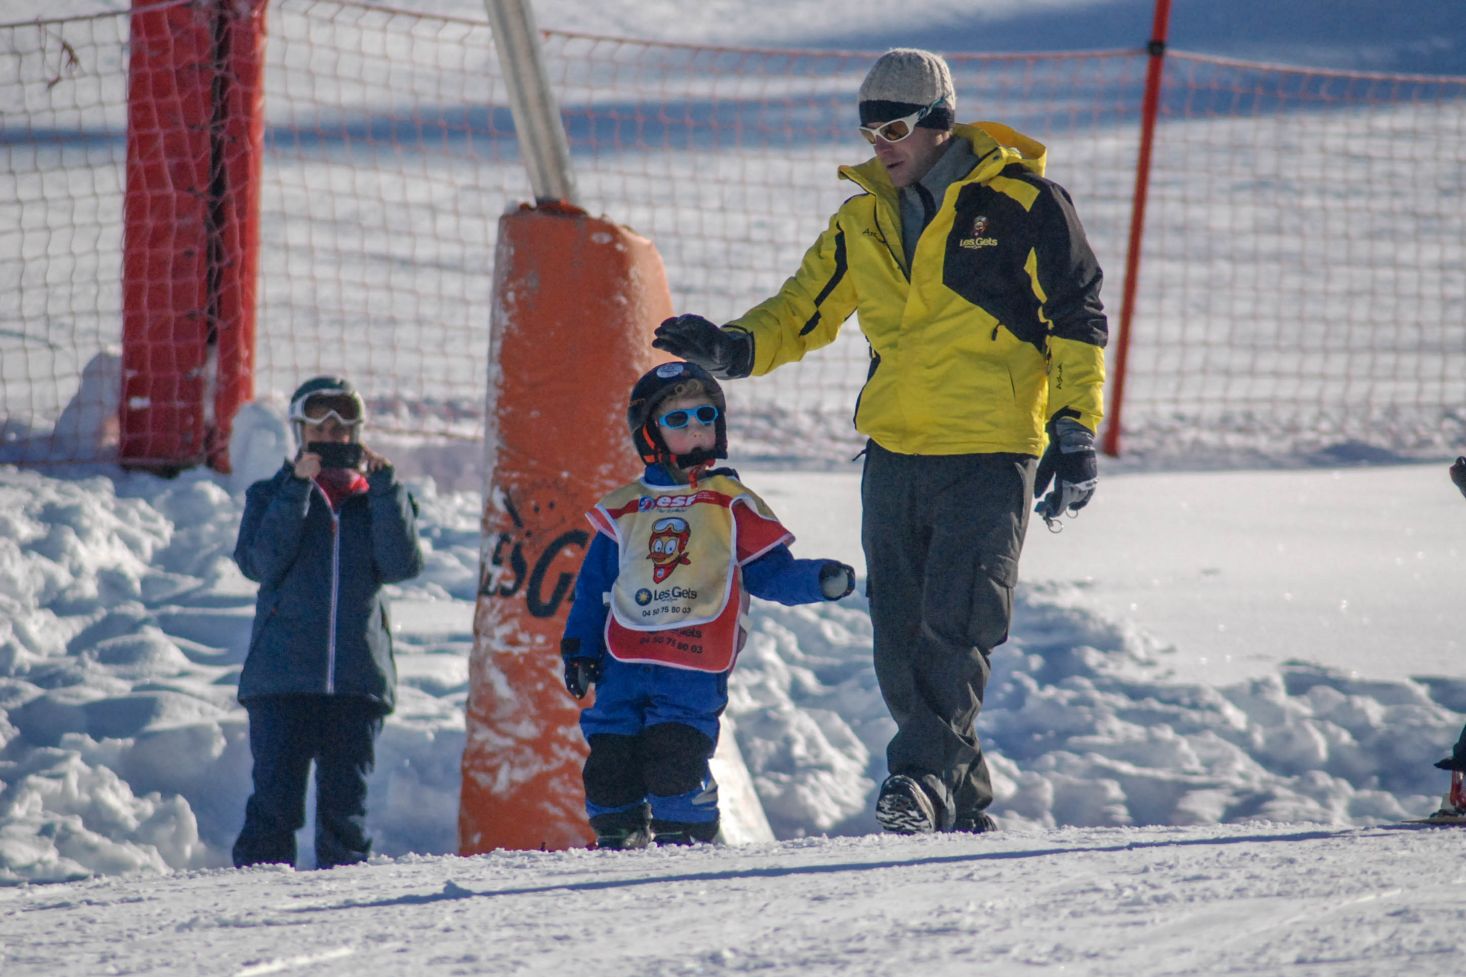 Les Gets Ski Instructor with child